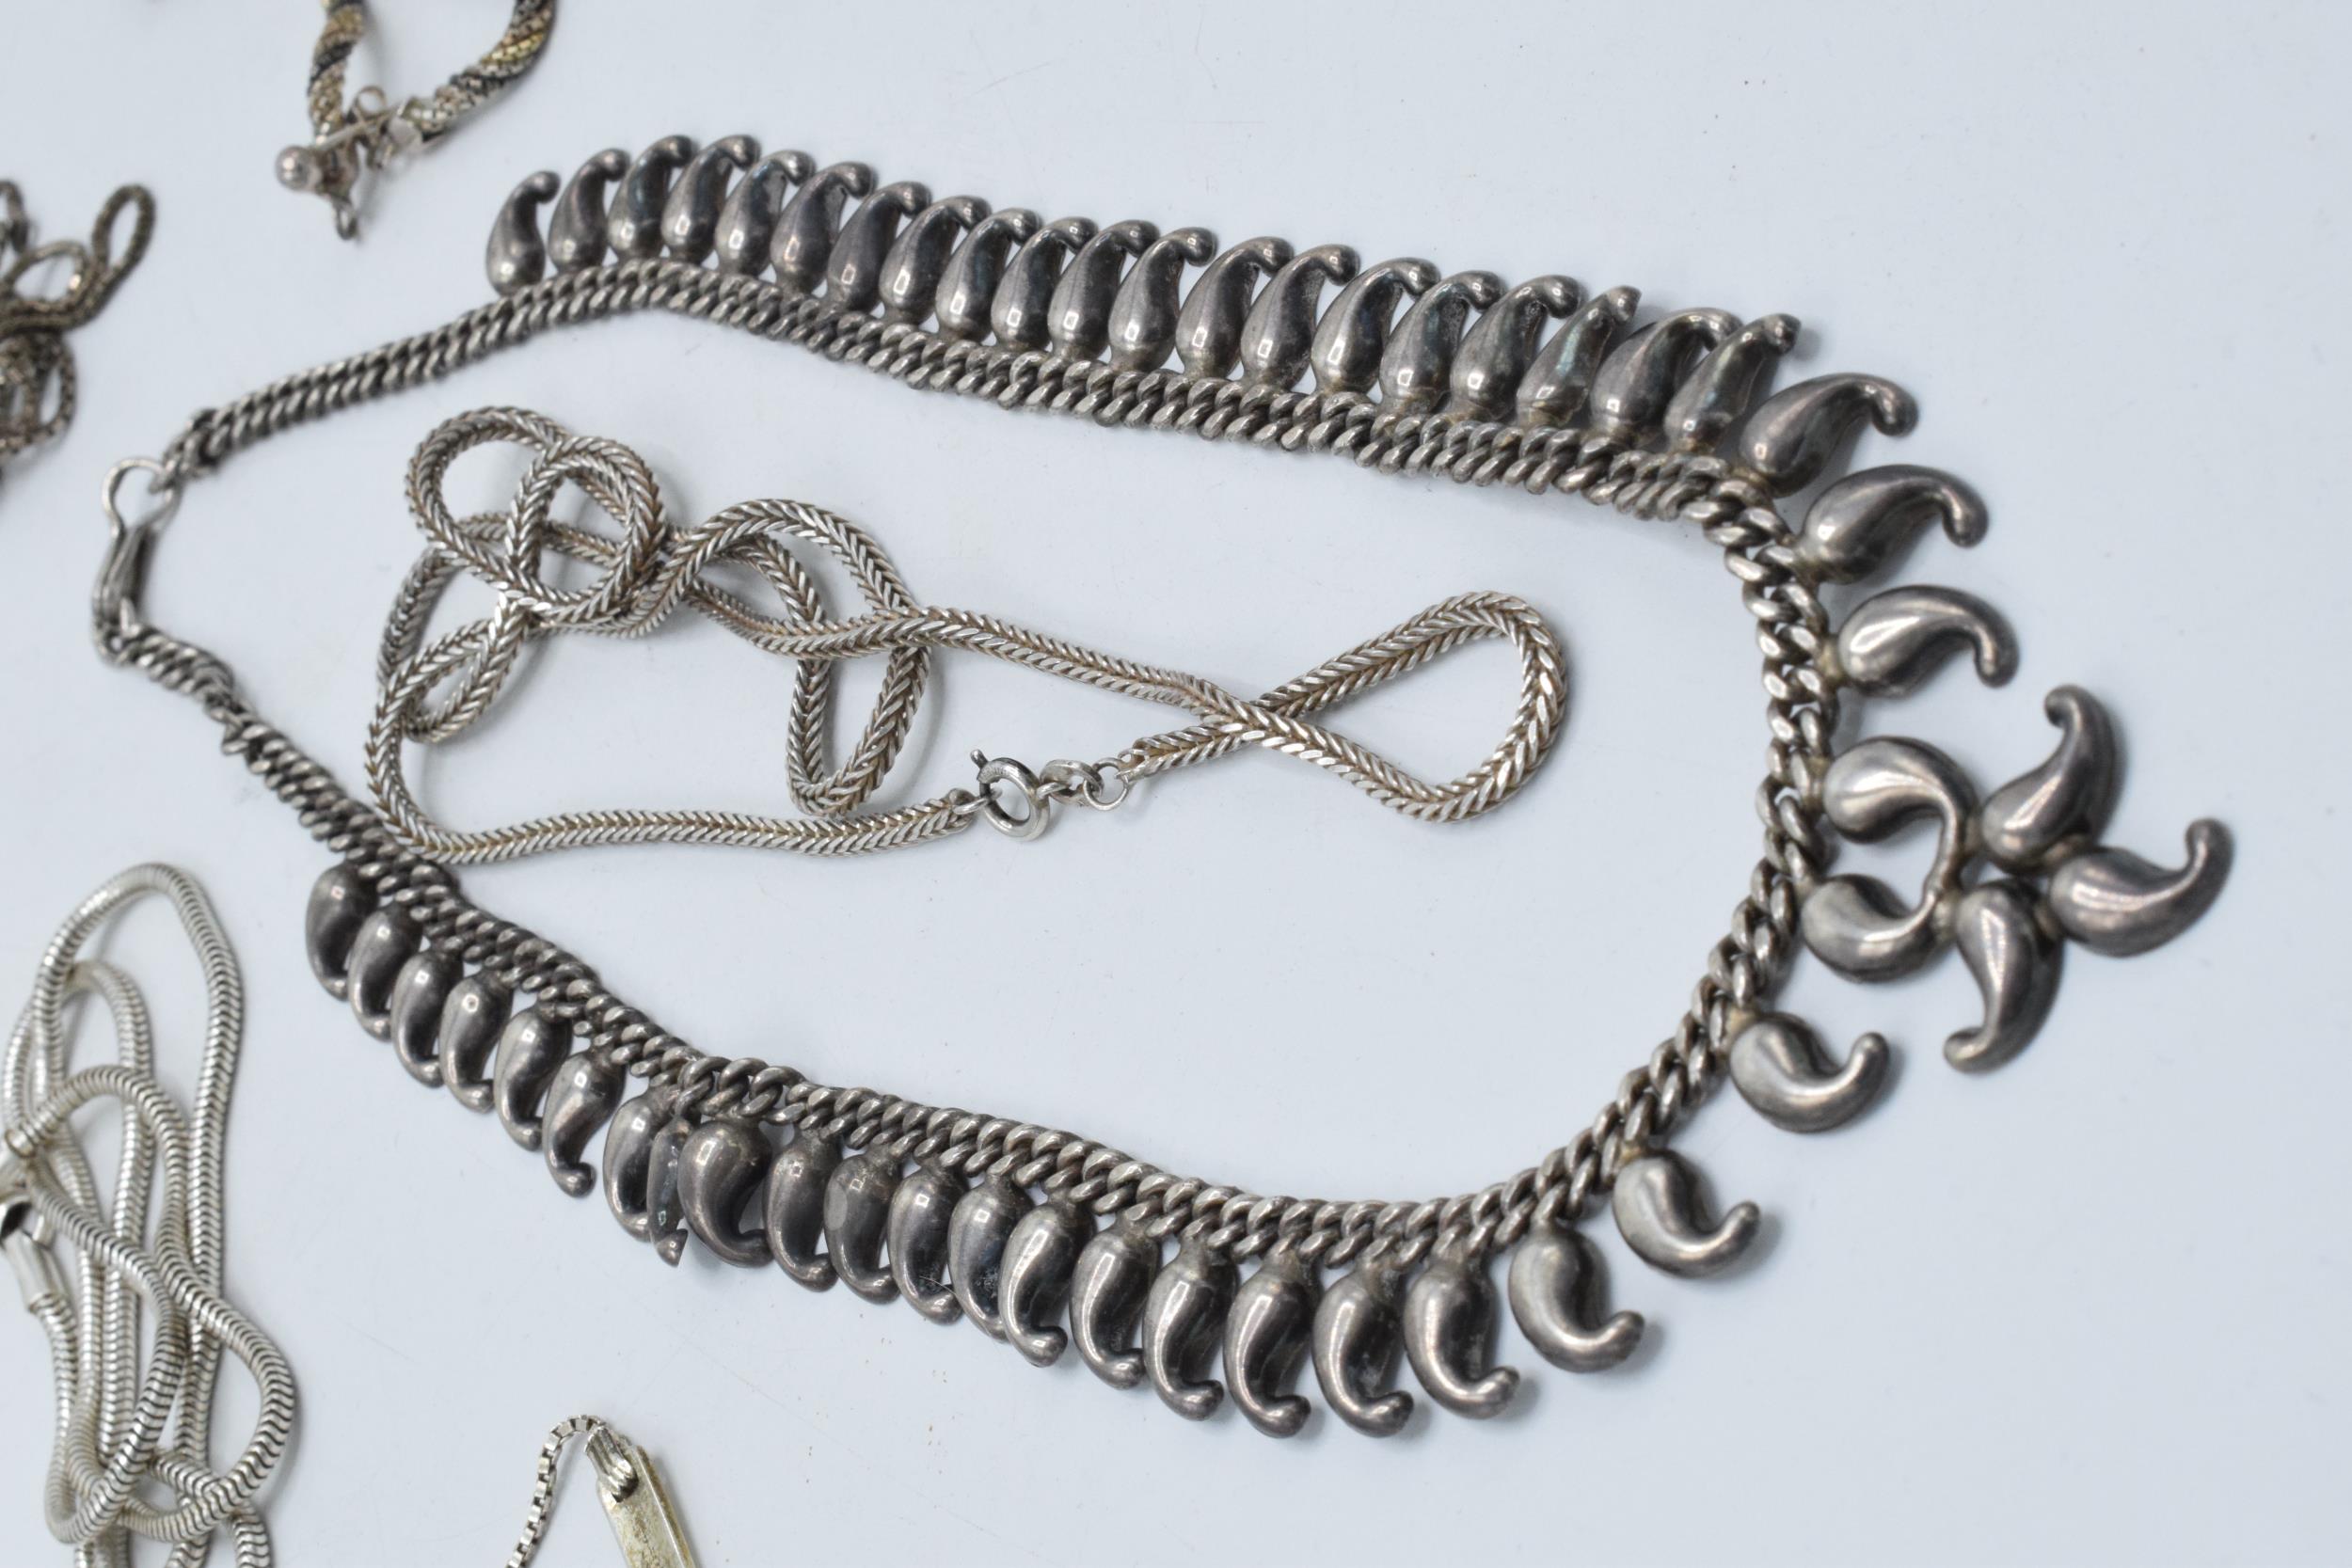 A collection of silver chains and necklaces of varying lengths and styles, 190.8 grams. - Image 3 of 6